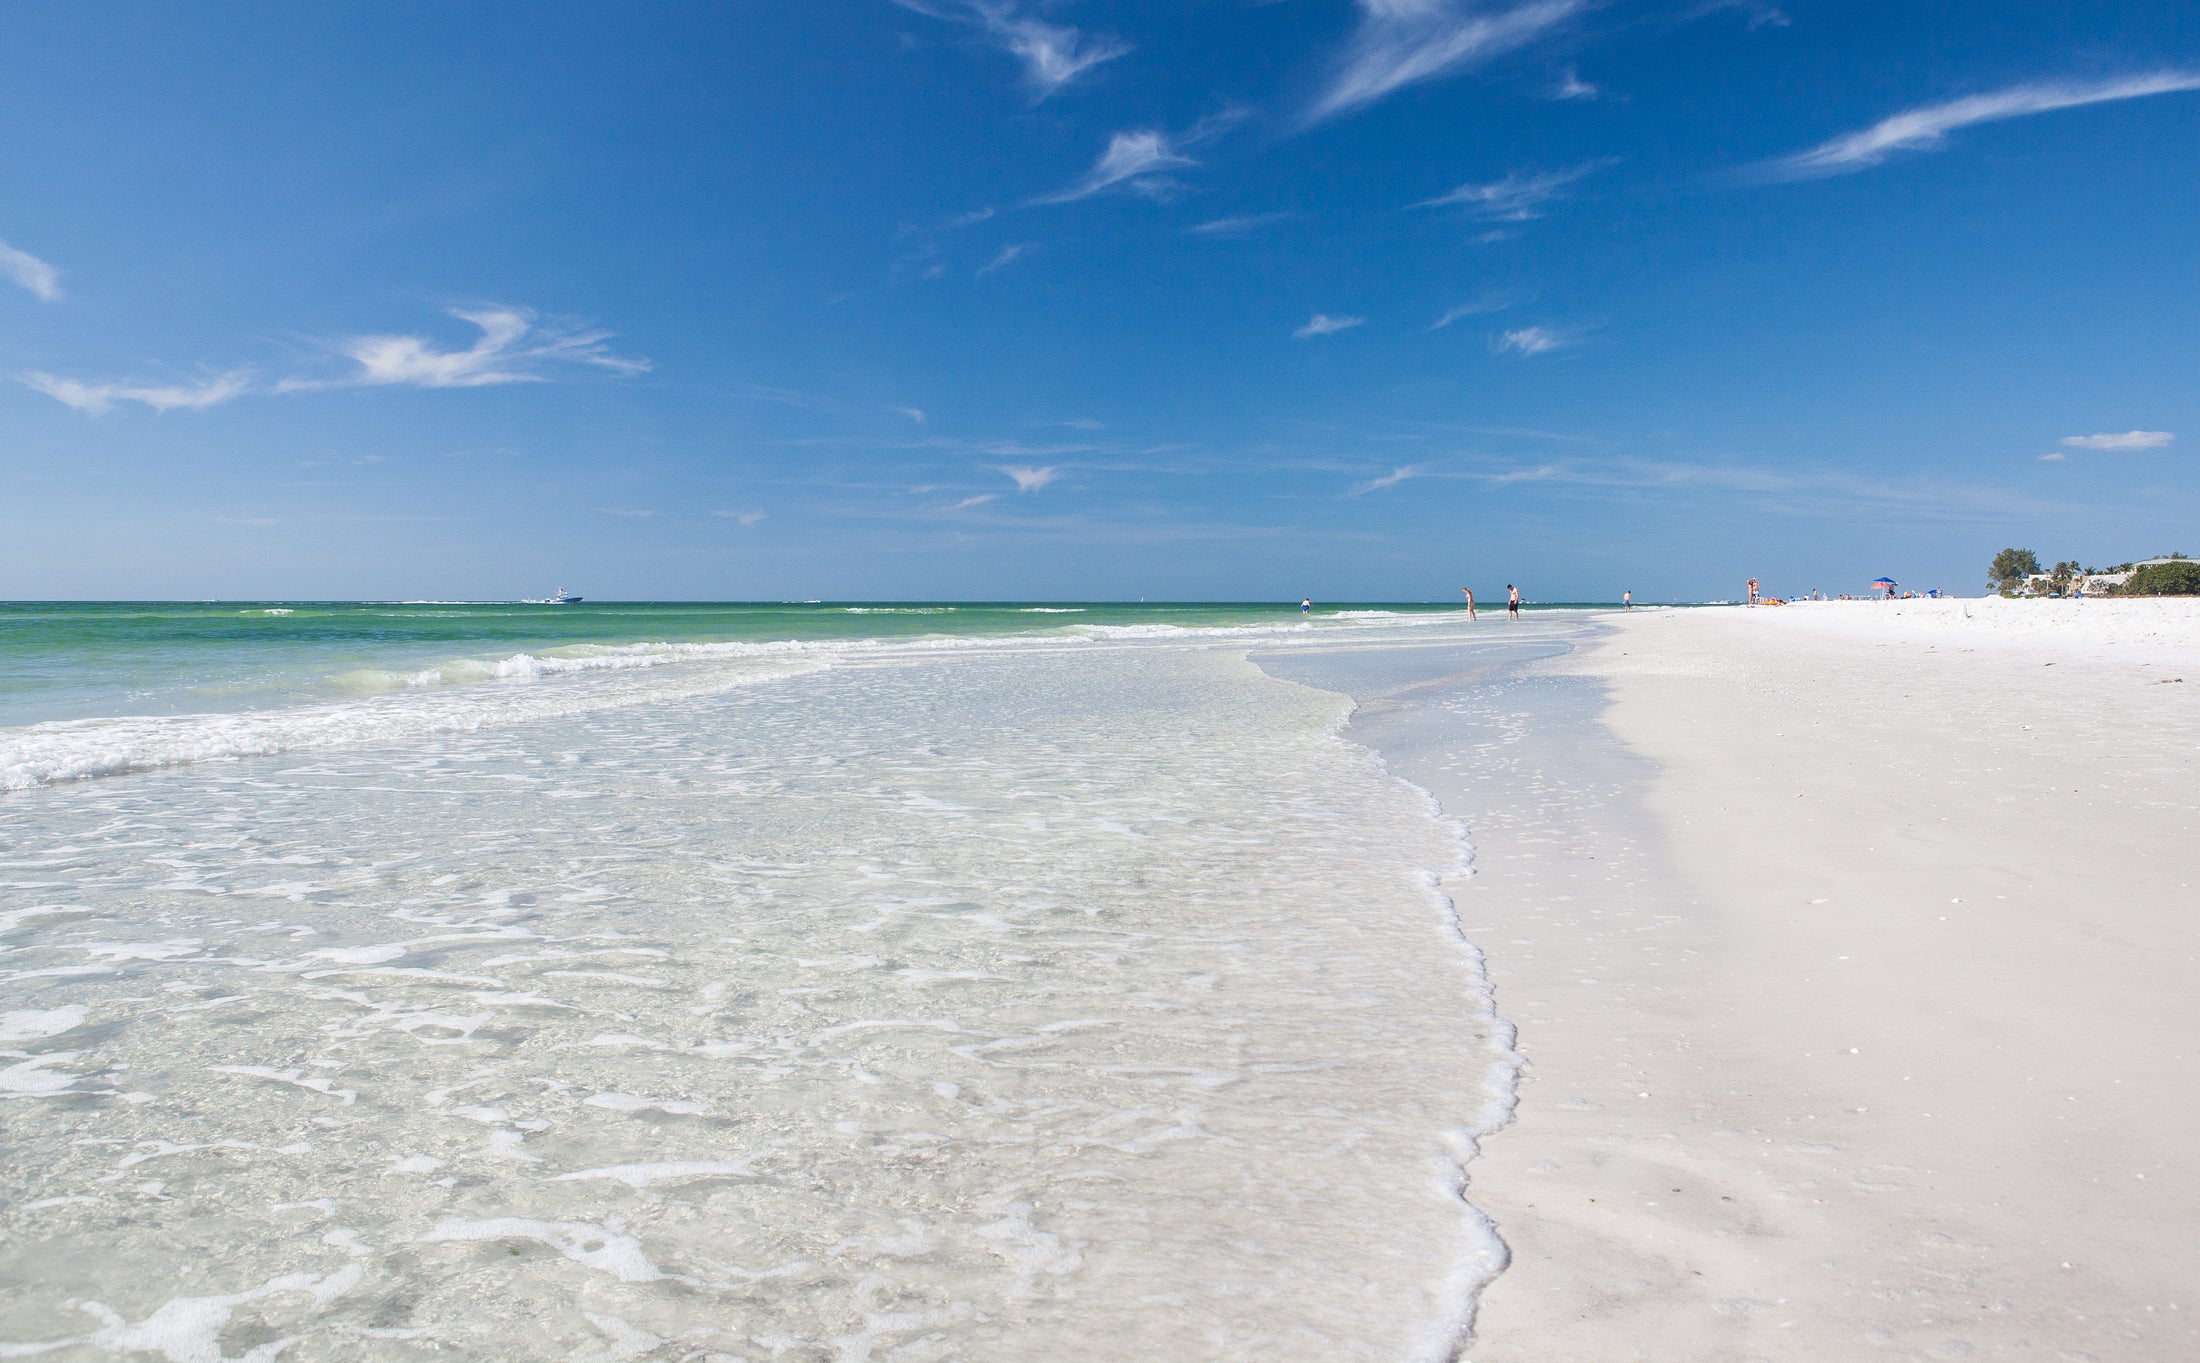 White quartz sand and turquoise waters? That’s Siesta Key